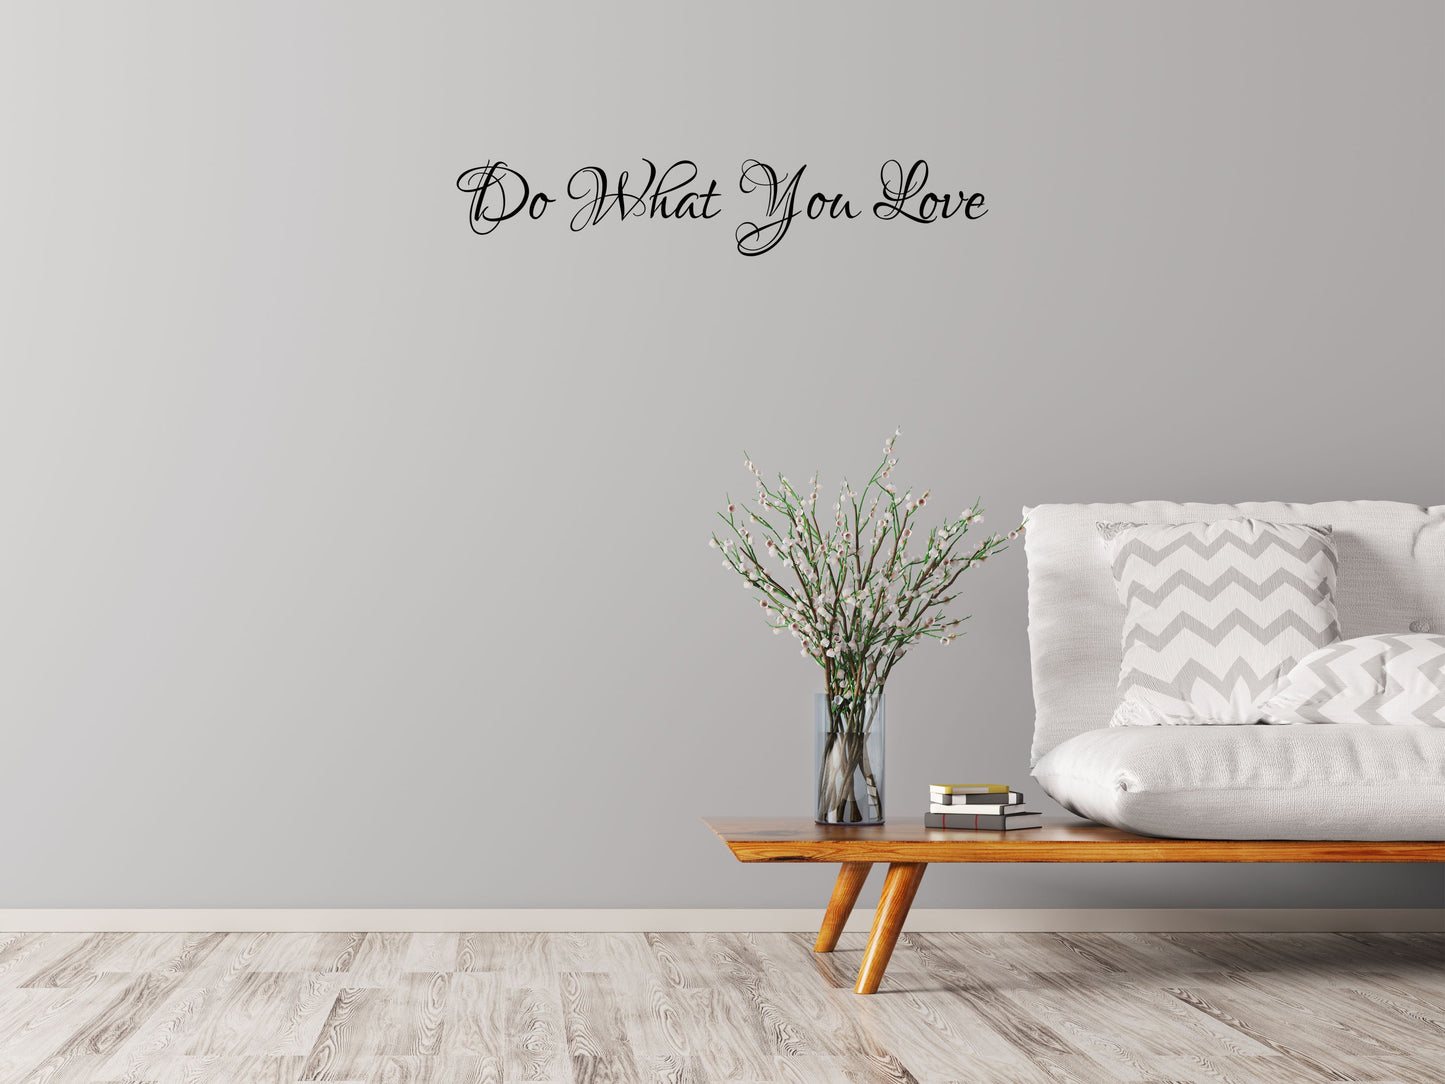 Do What You Love Wall Sticker Quotes - Romance Decal- Inspirational Wall Decals Vinyl Wall Decal Inspirational Wall Signs 